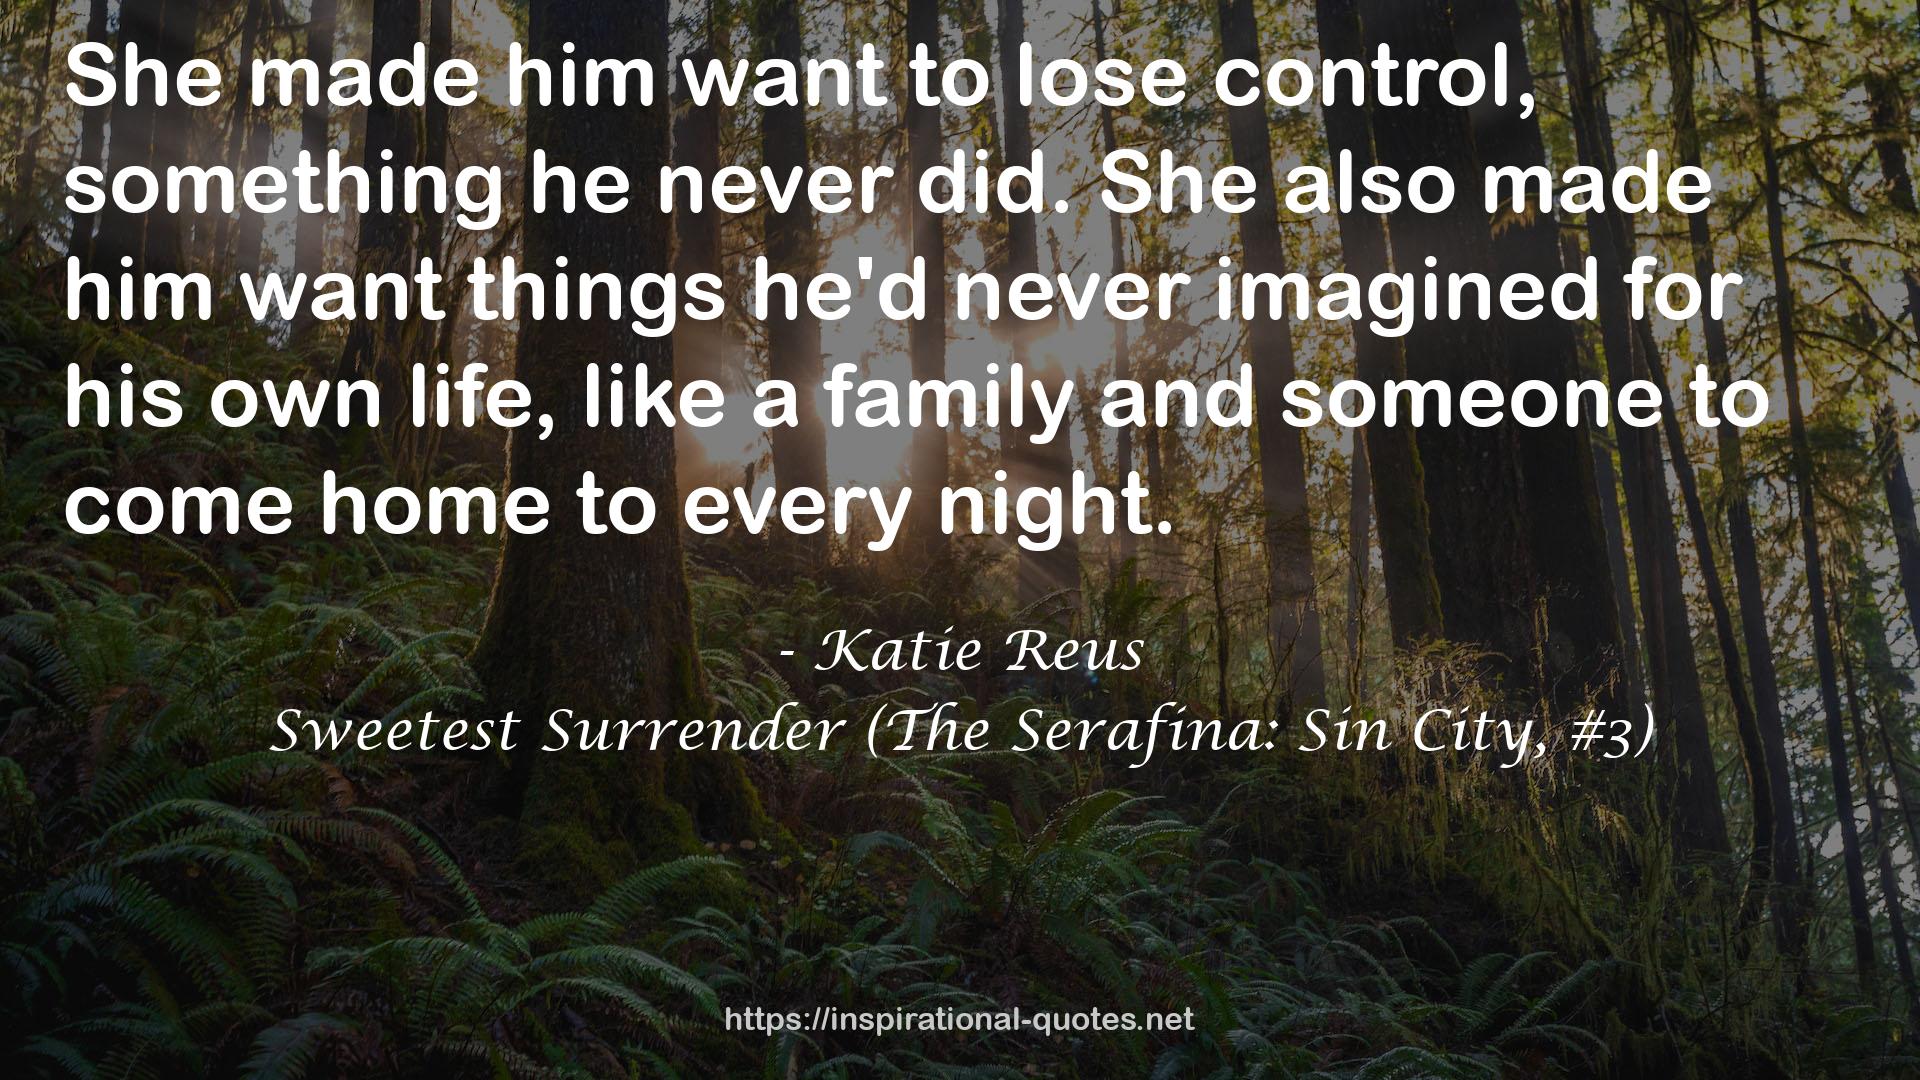 Sweetest Surrender (The Serafina: Sin City, #3) QUOTES